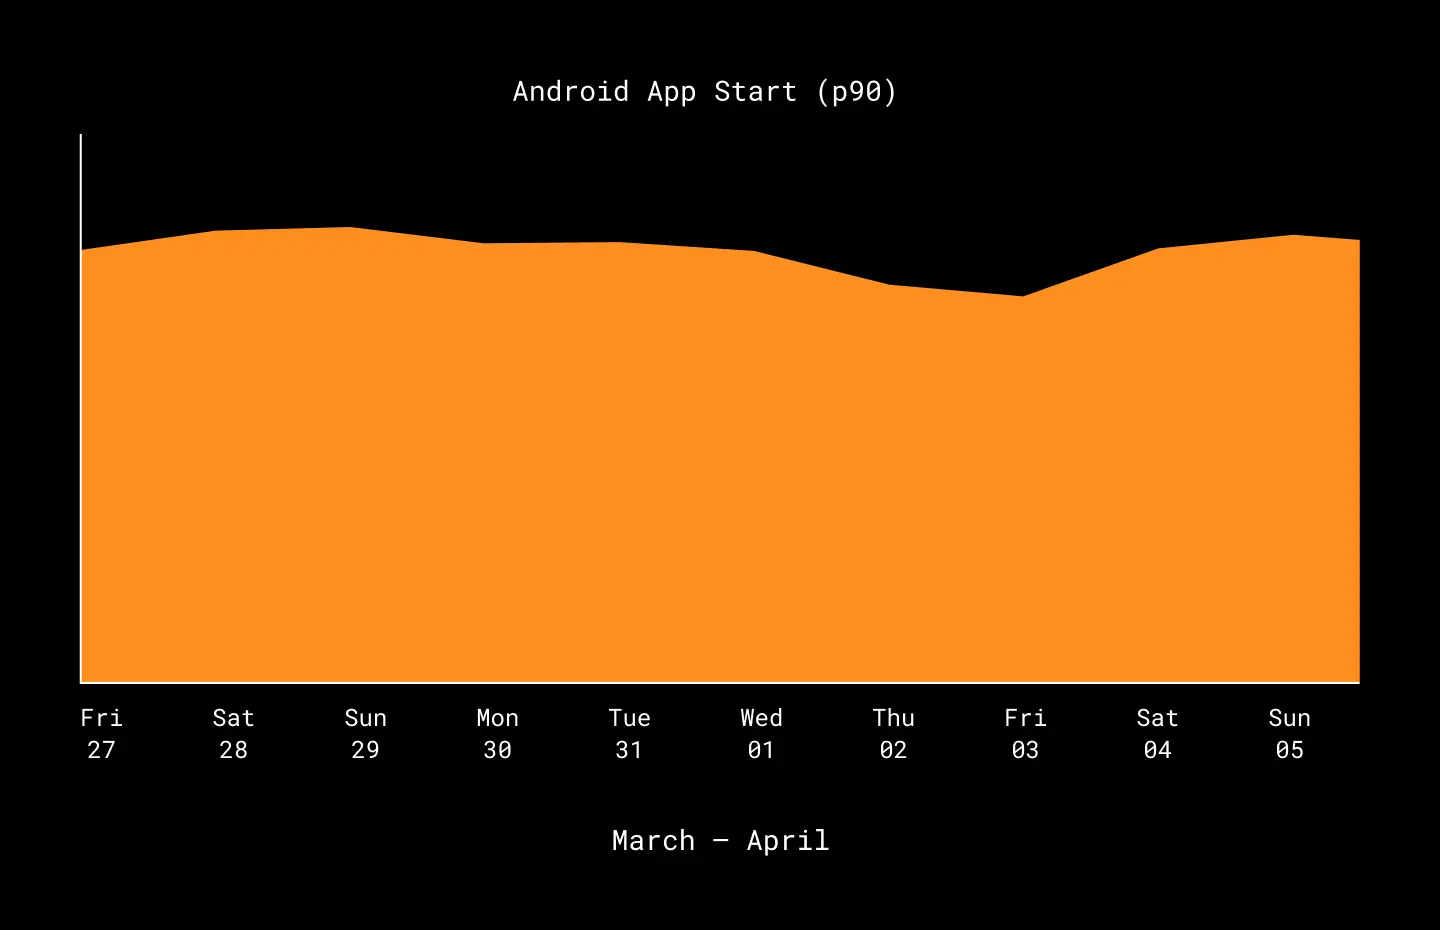 app startup p90 measurements from late March to early April 2020